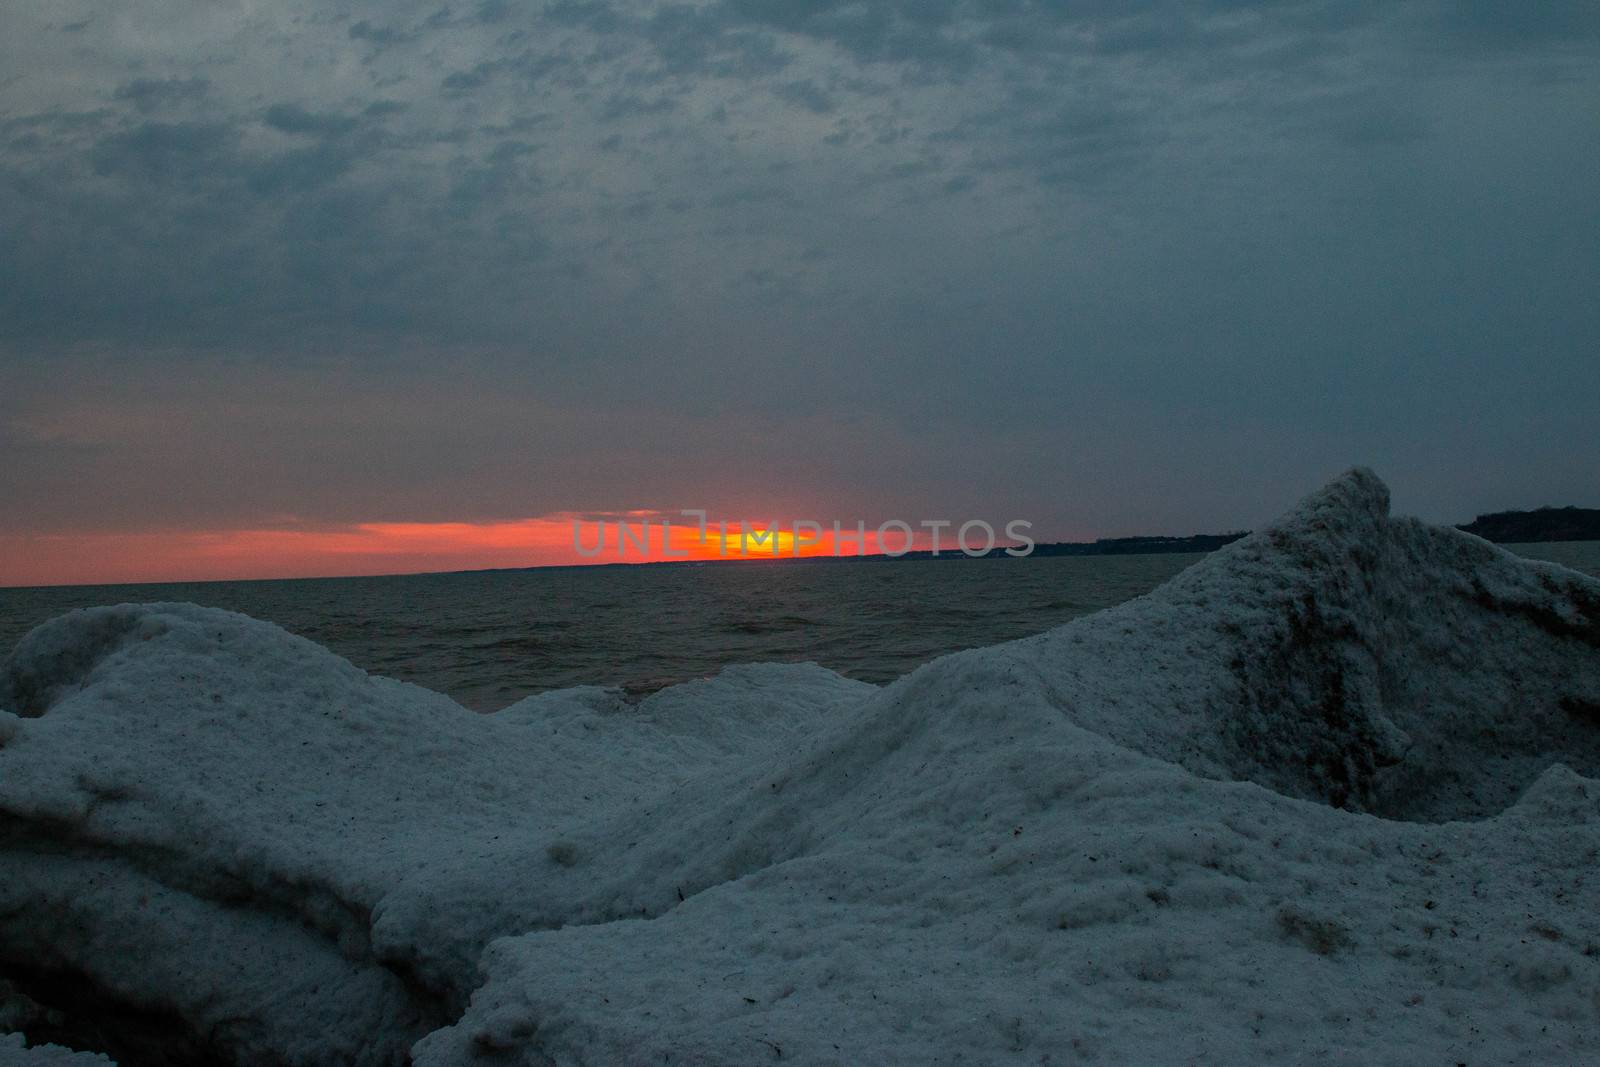 Port stanley beach in winter at sunset. Ontario Canada photograph by mynewturtle1